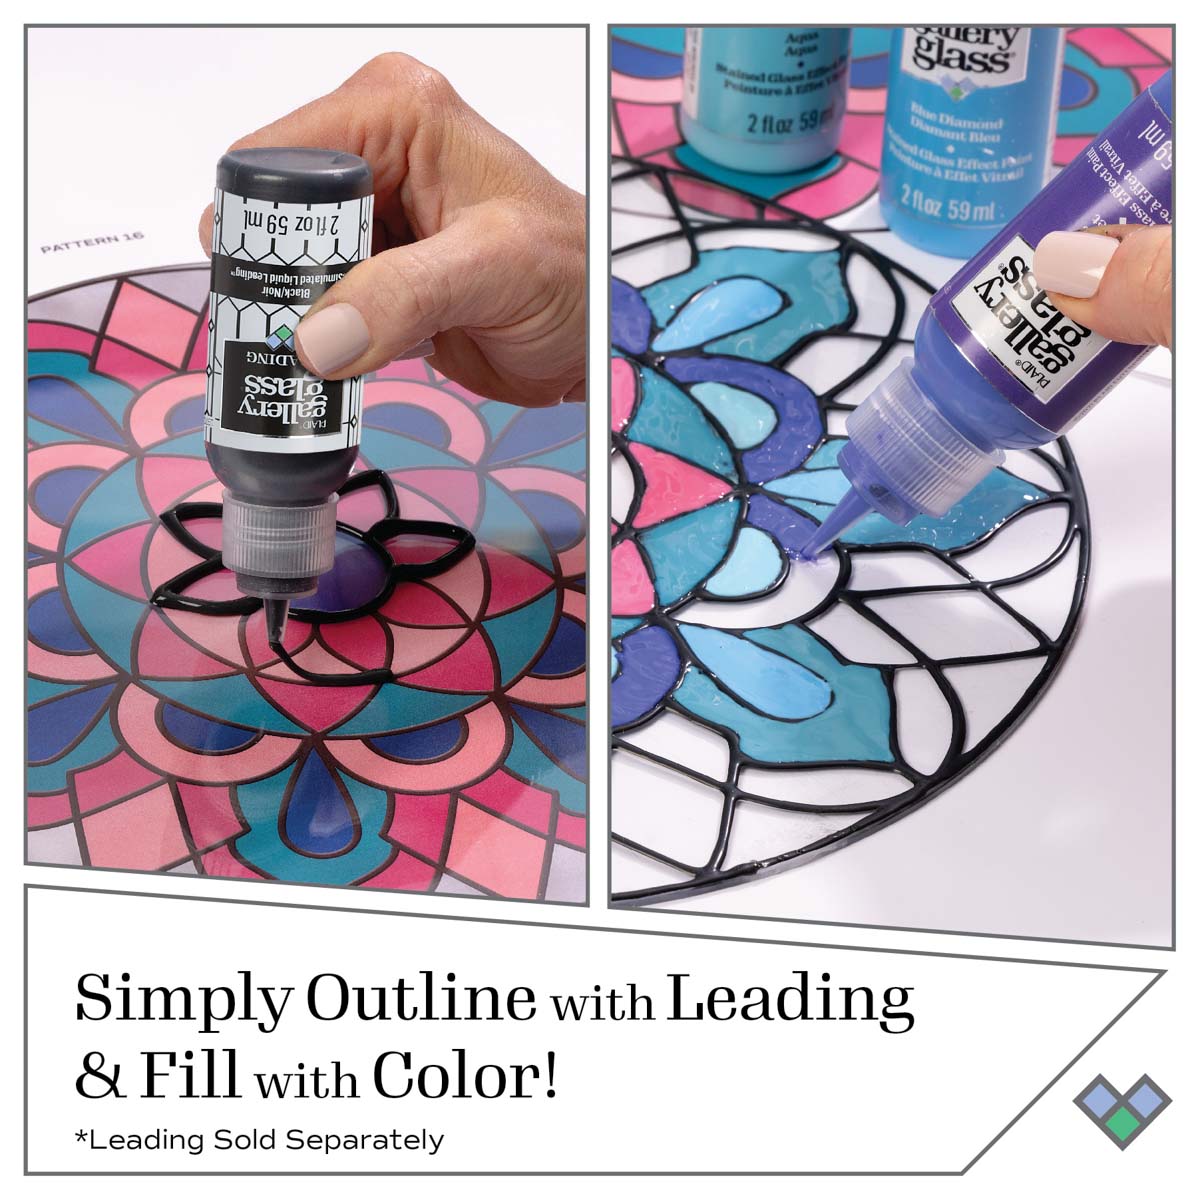 Gallery Glass ® Iridescent™ Stained Glass Effect Paint - Violet-Green-Blue, 2 oz. - 19670